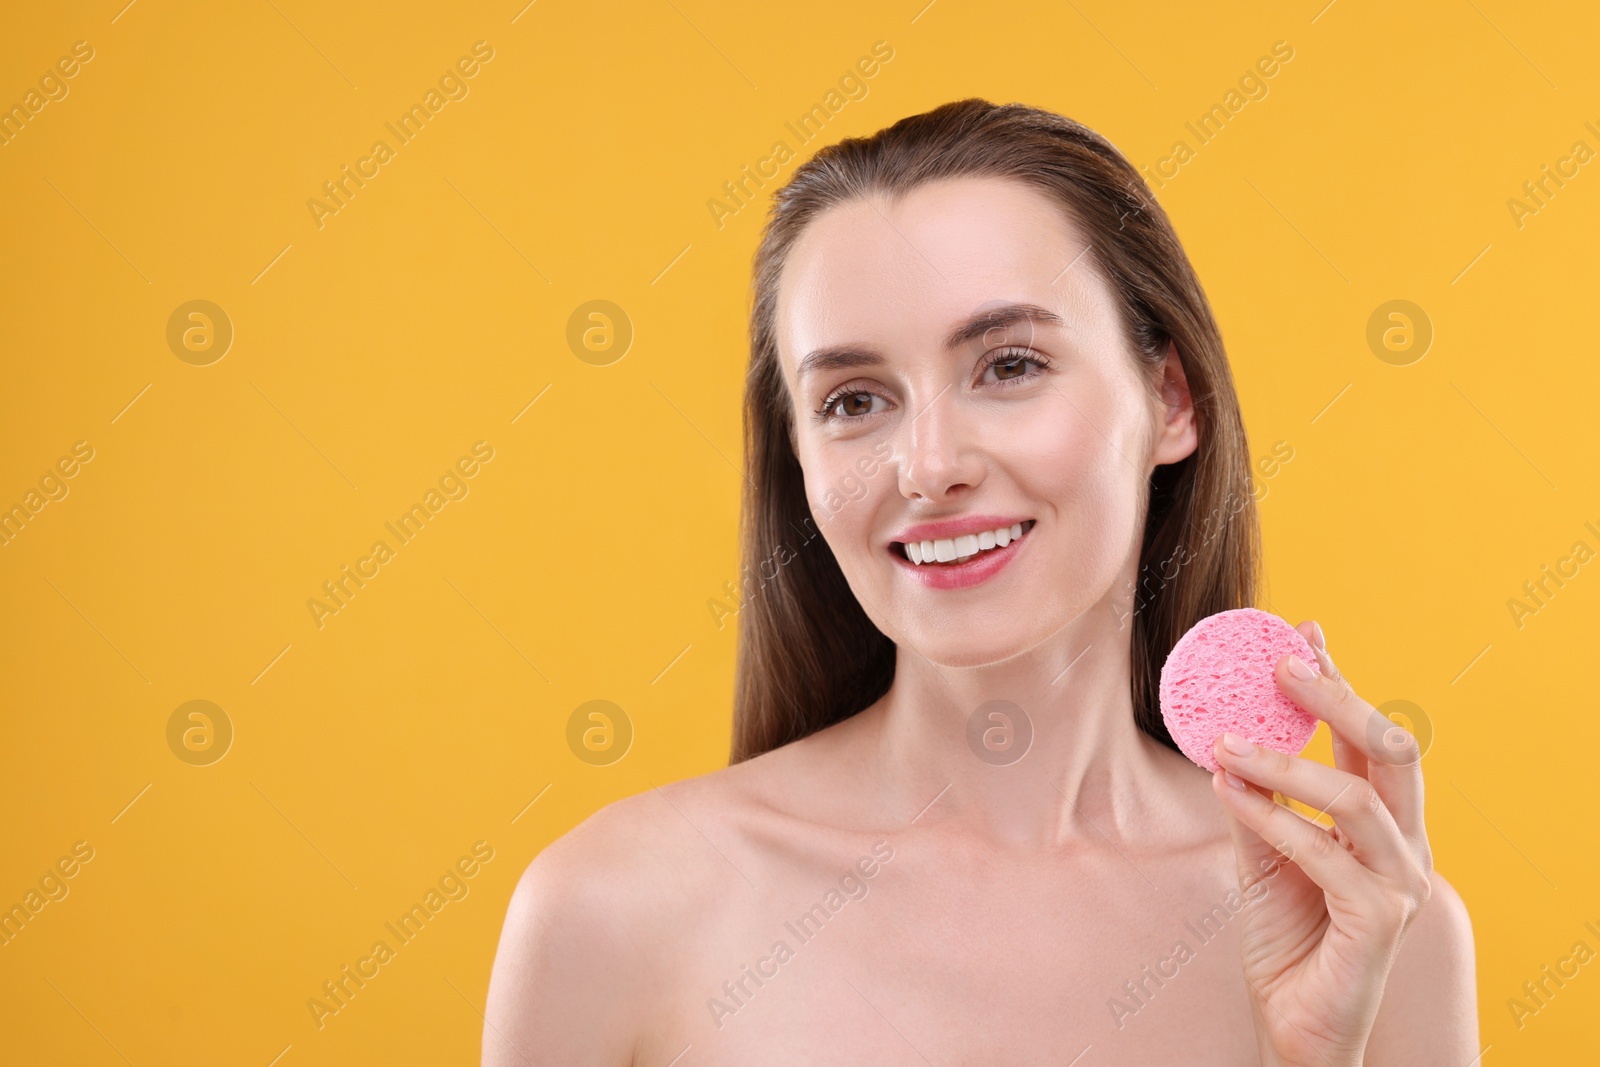 Photo of Happy young woman holding face sponge on orange background. Space for text